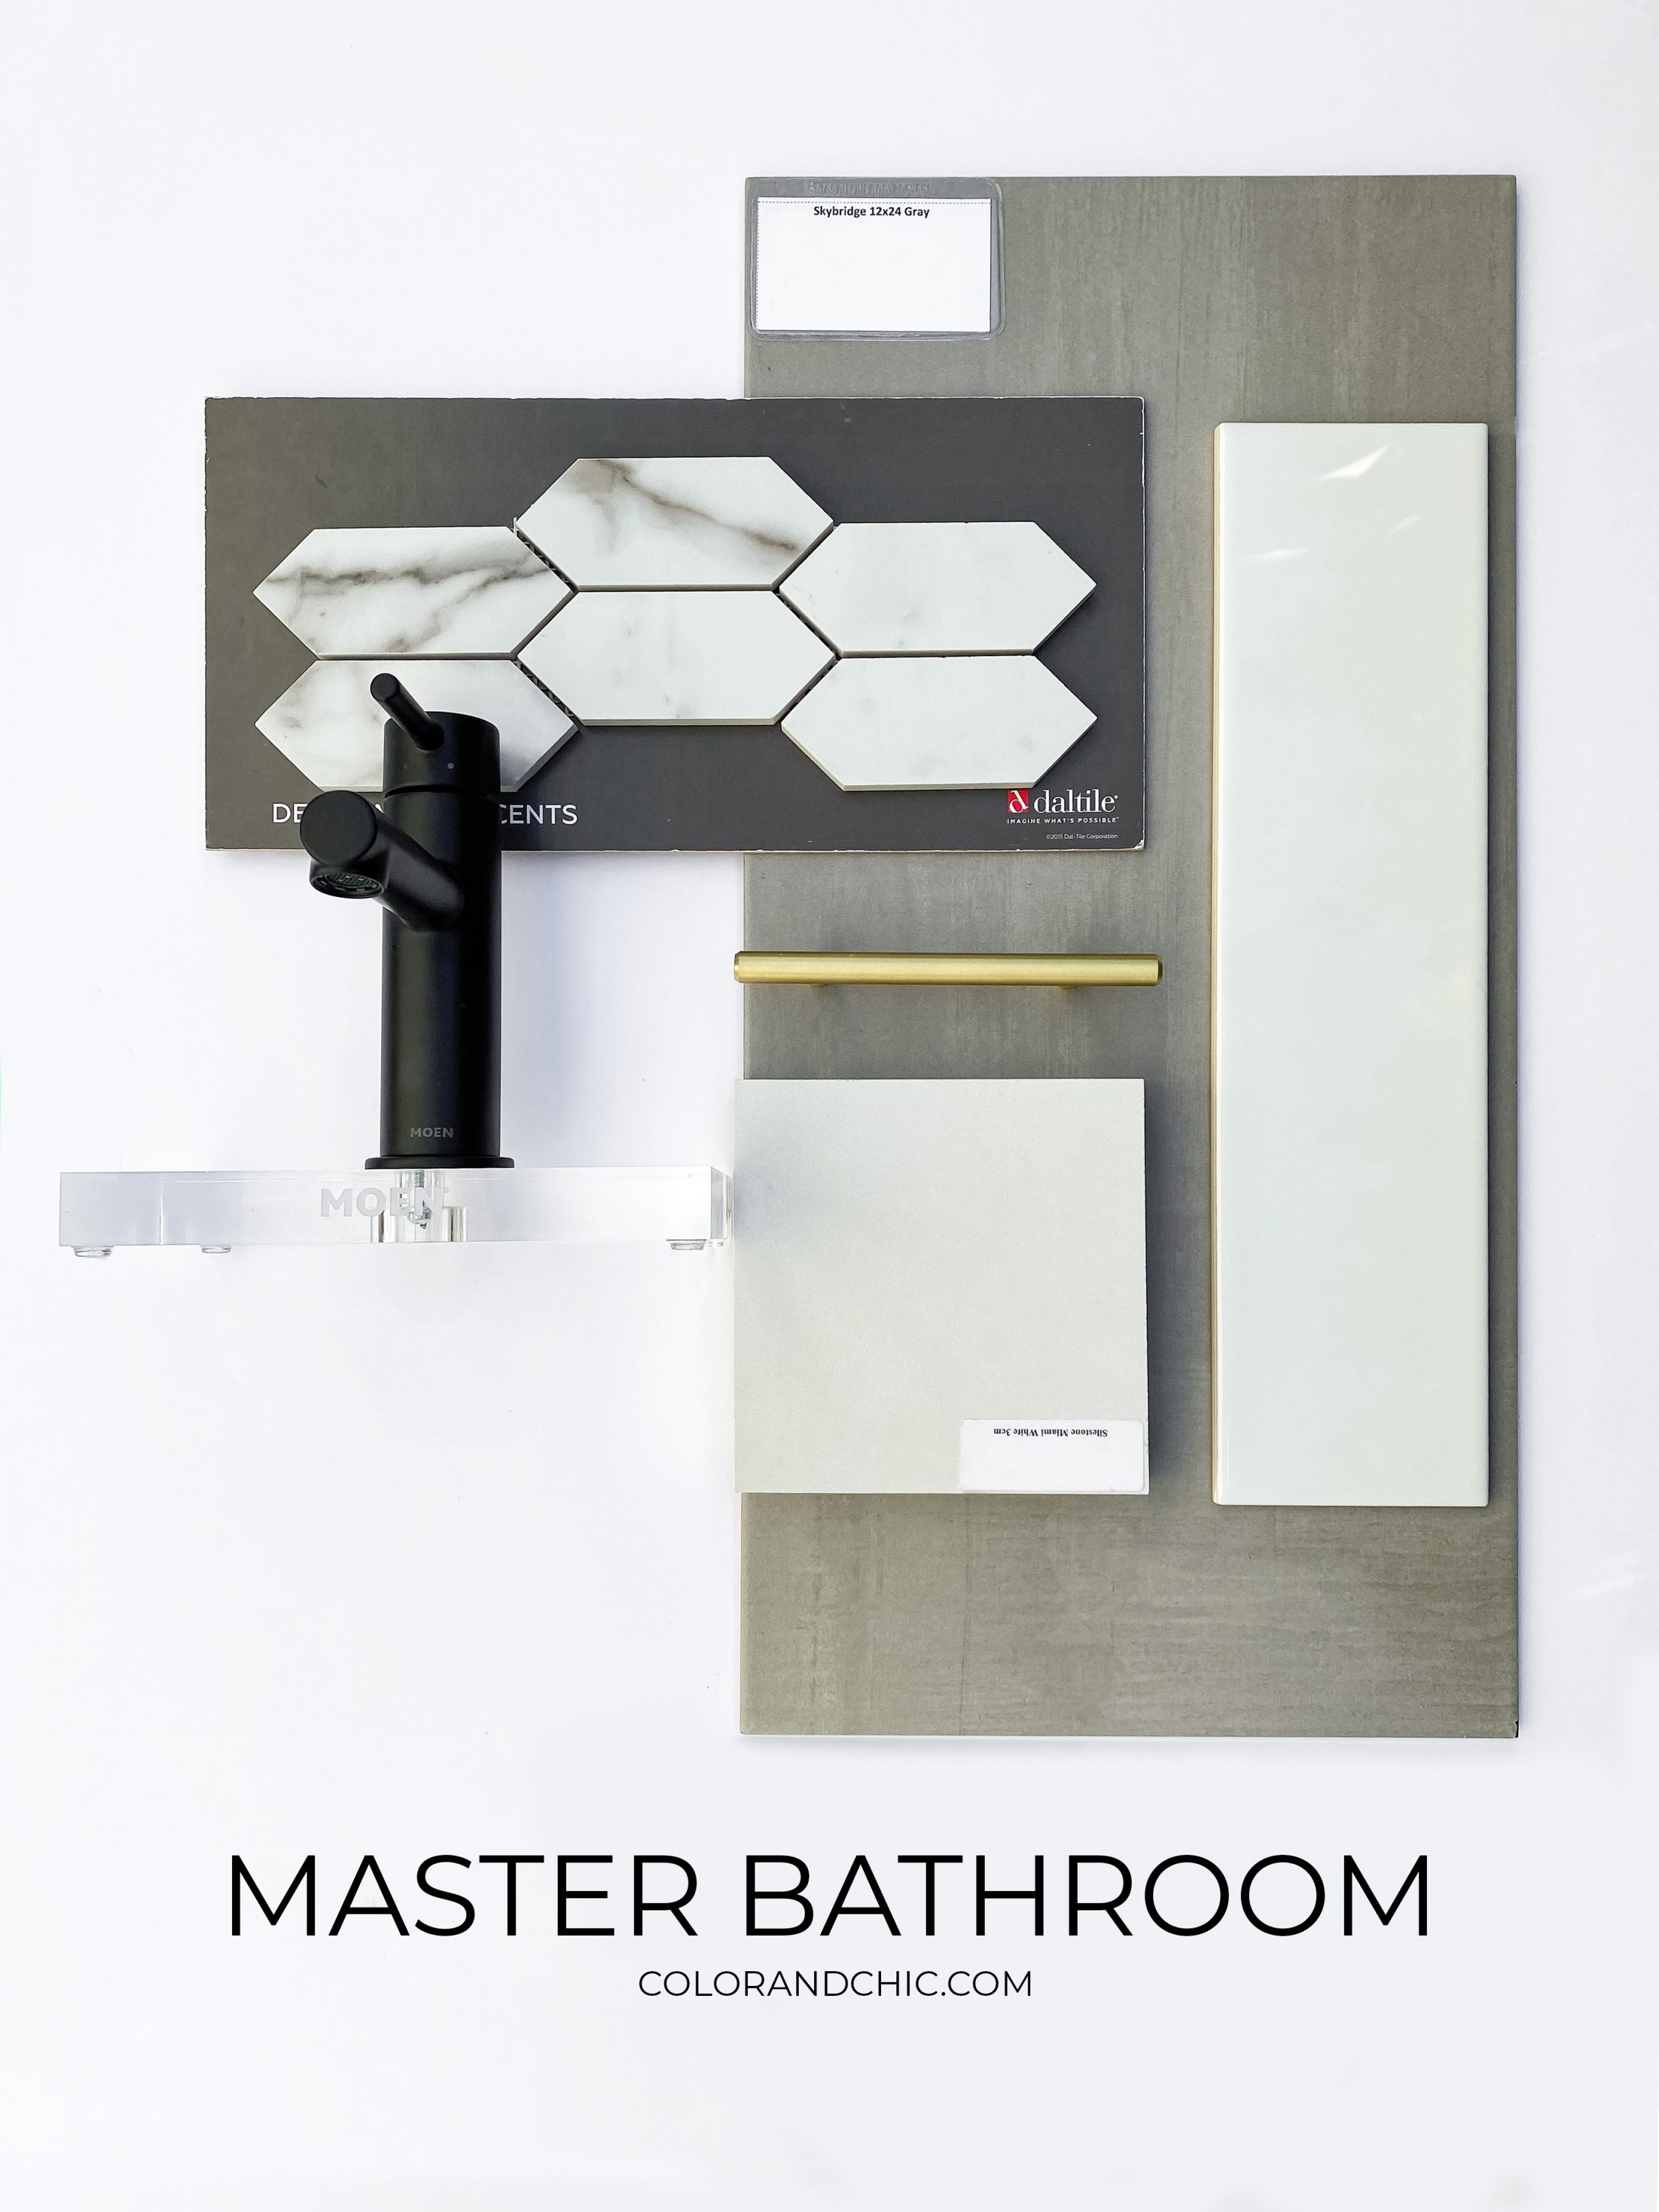 Master bathroom finishes for a new build in Dallas, Texas with 4x12 subway tile, cement tile, black faucet, marble shower floor and gold hardware